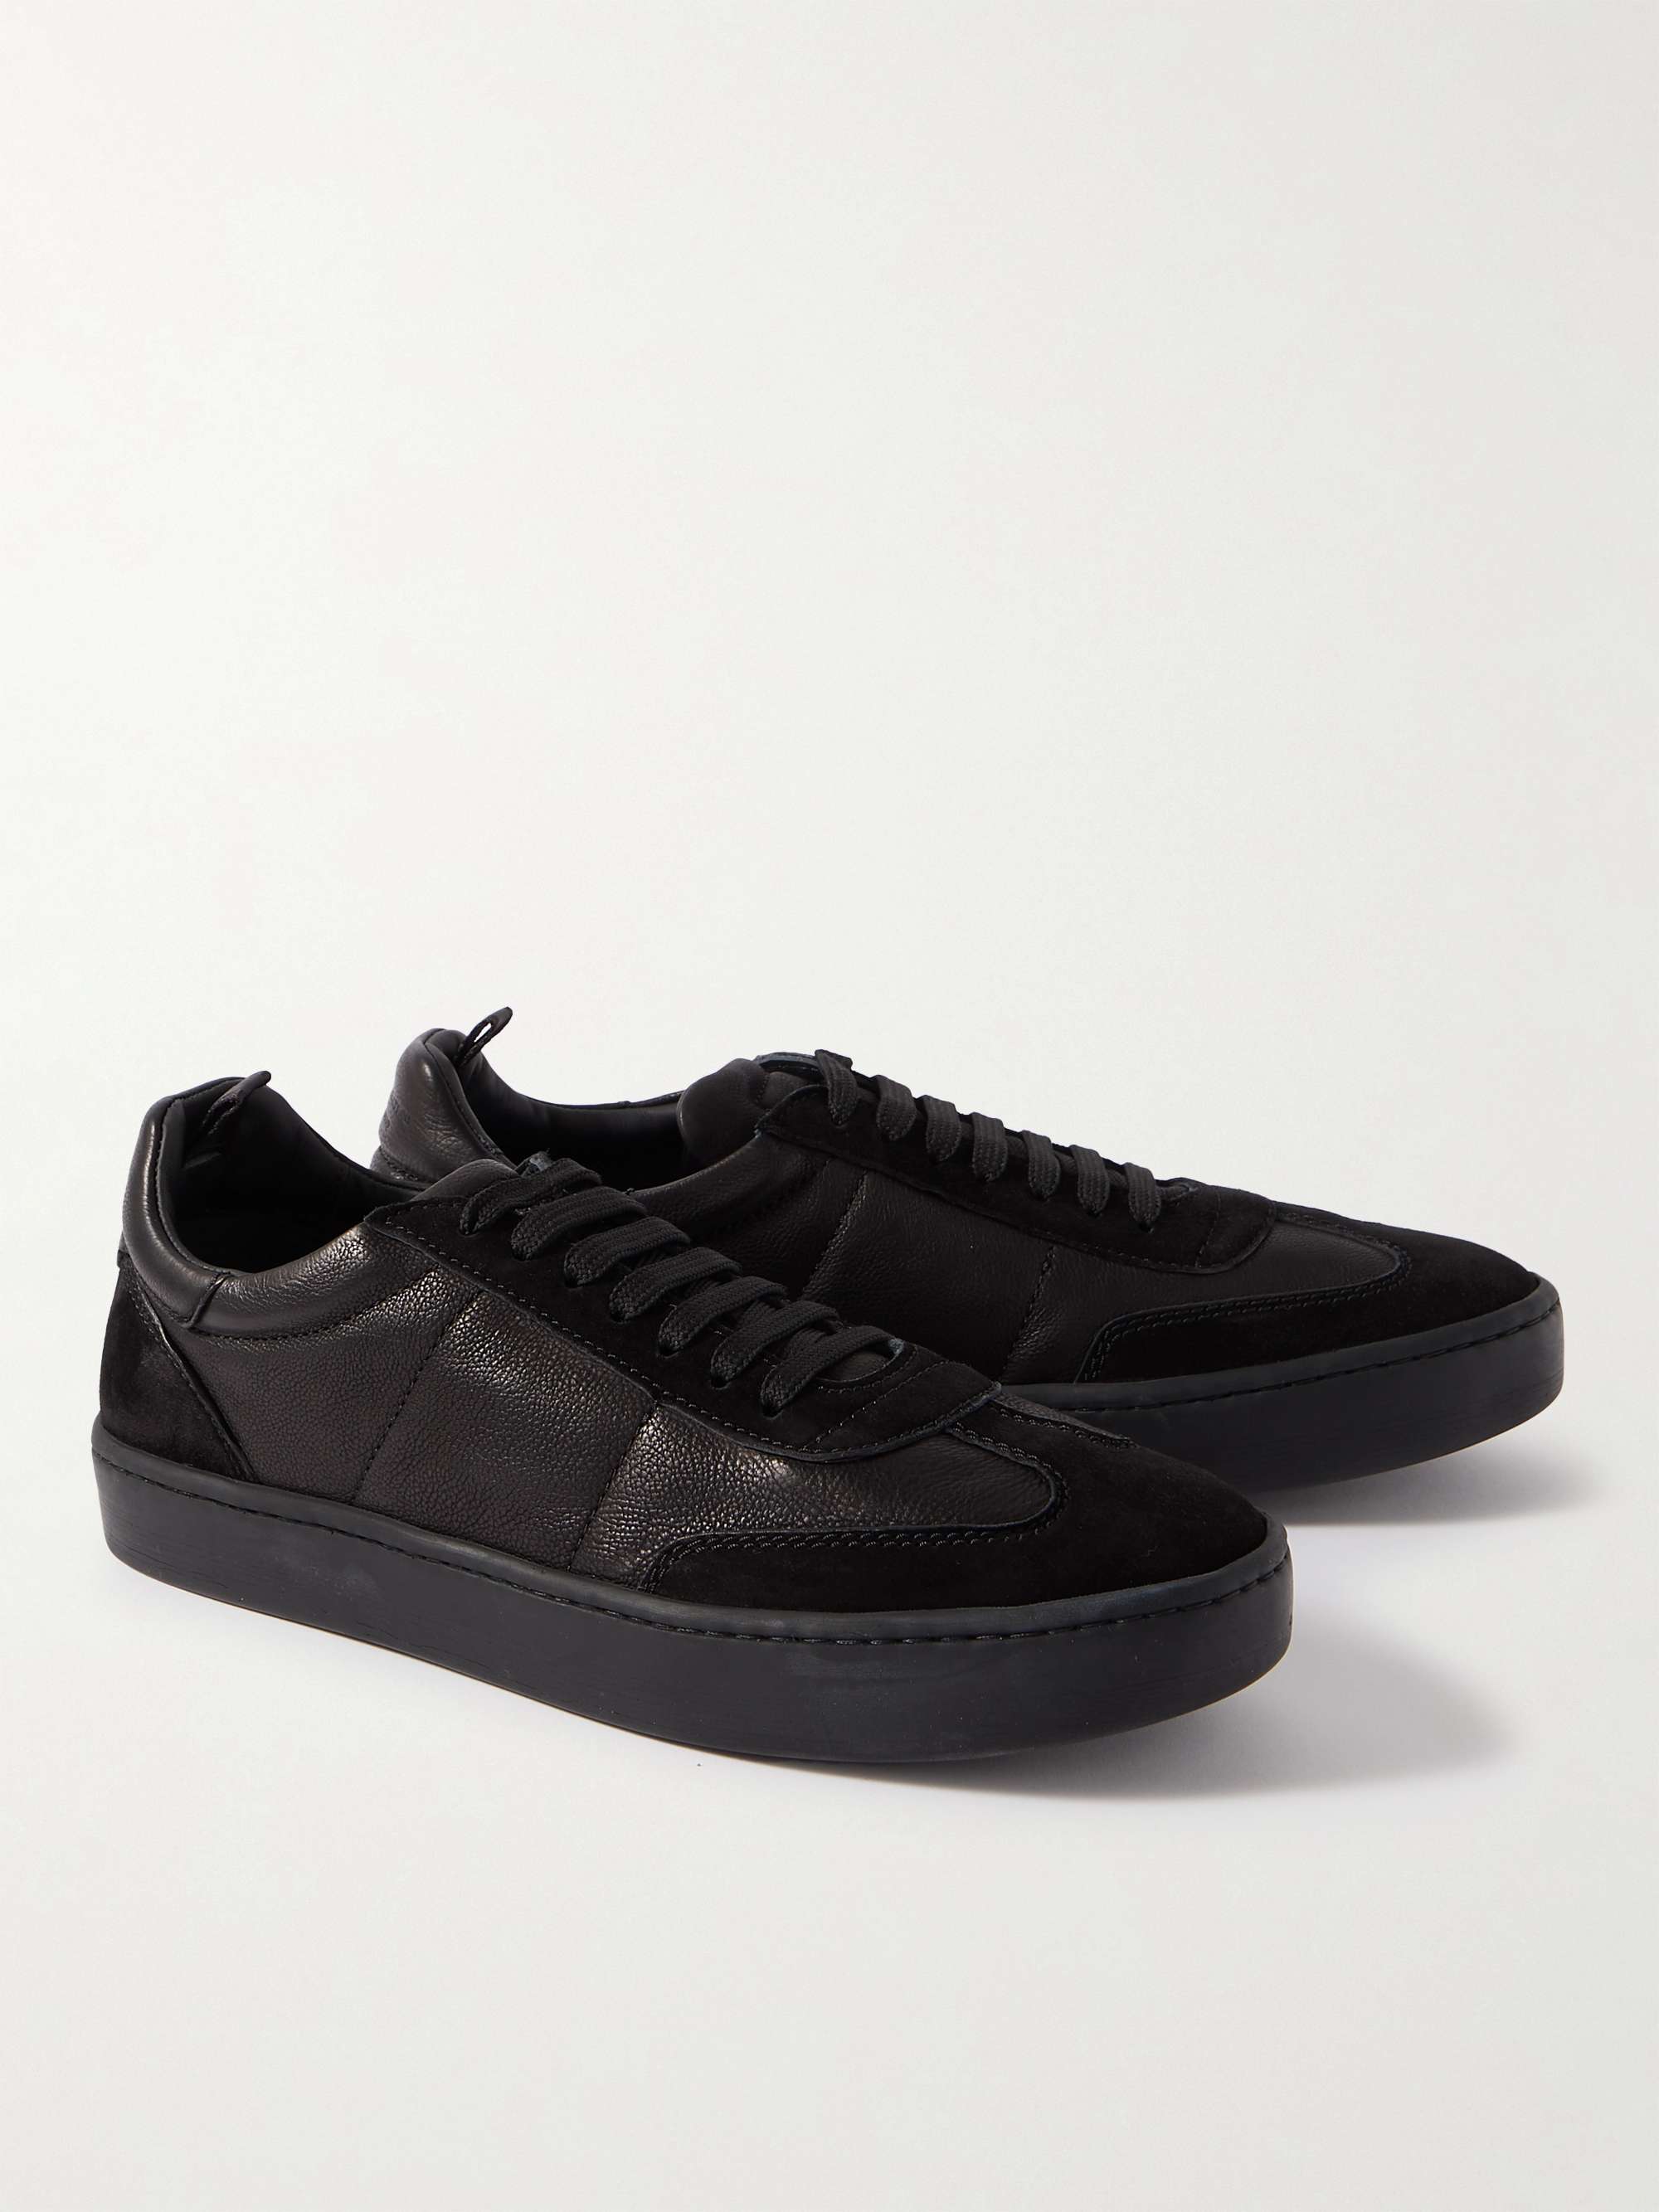 OFFICINE CREATIVE Kombo Suede-Trimmed Leather Sneakers for Men | MR PORTER